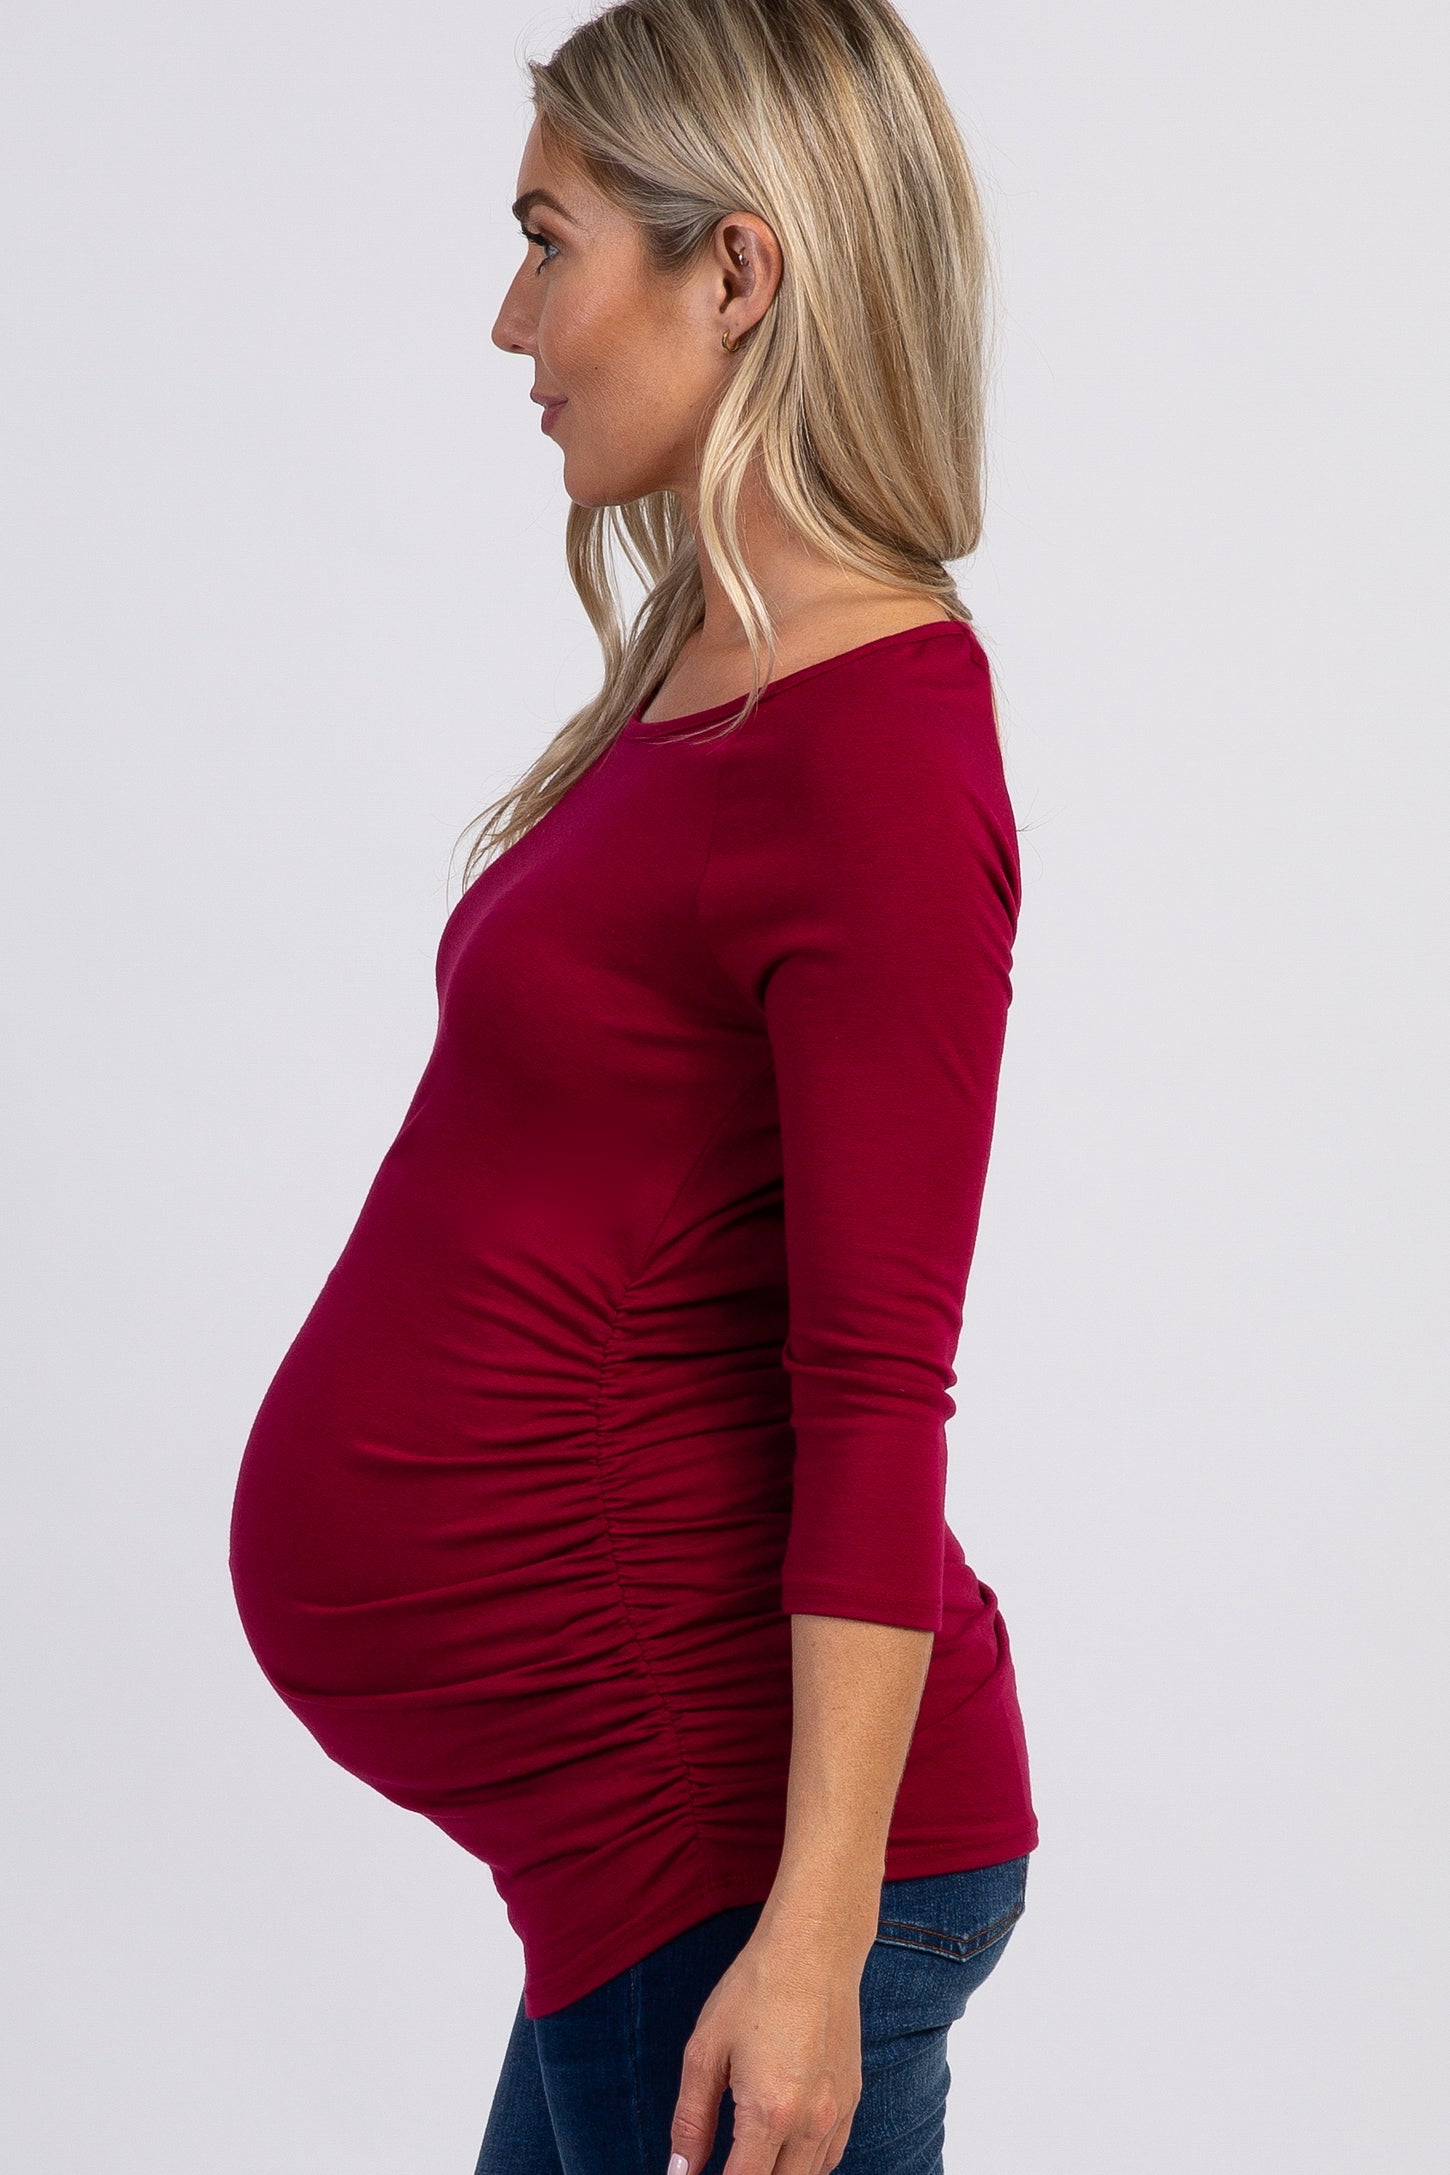 PinkBlush Burgundy Basic Ruched Fitted Maternity Top